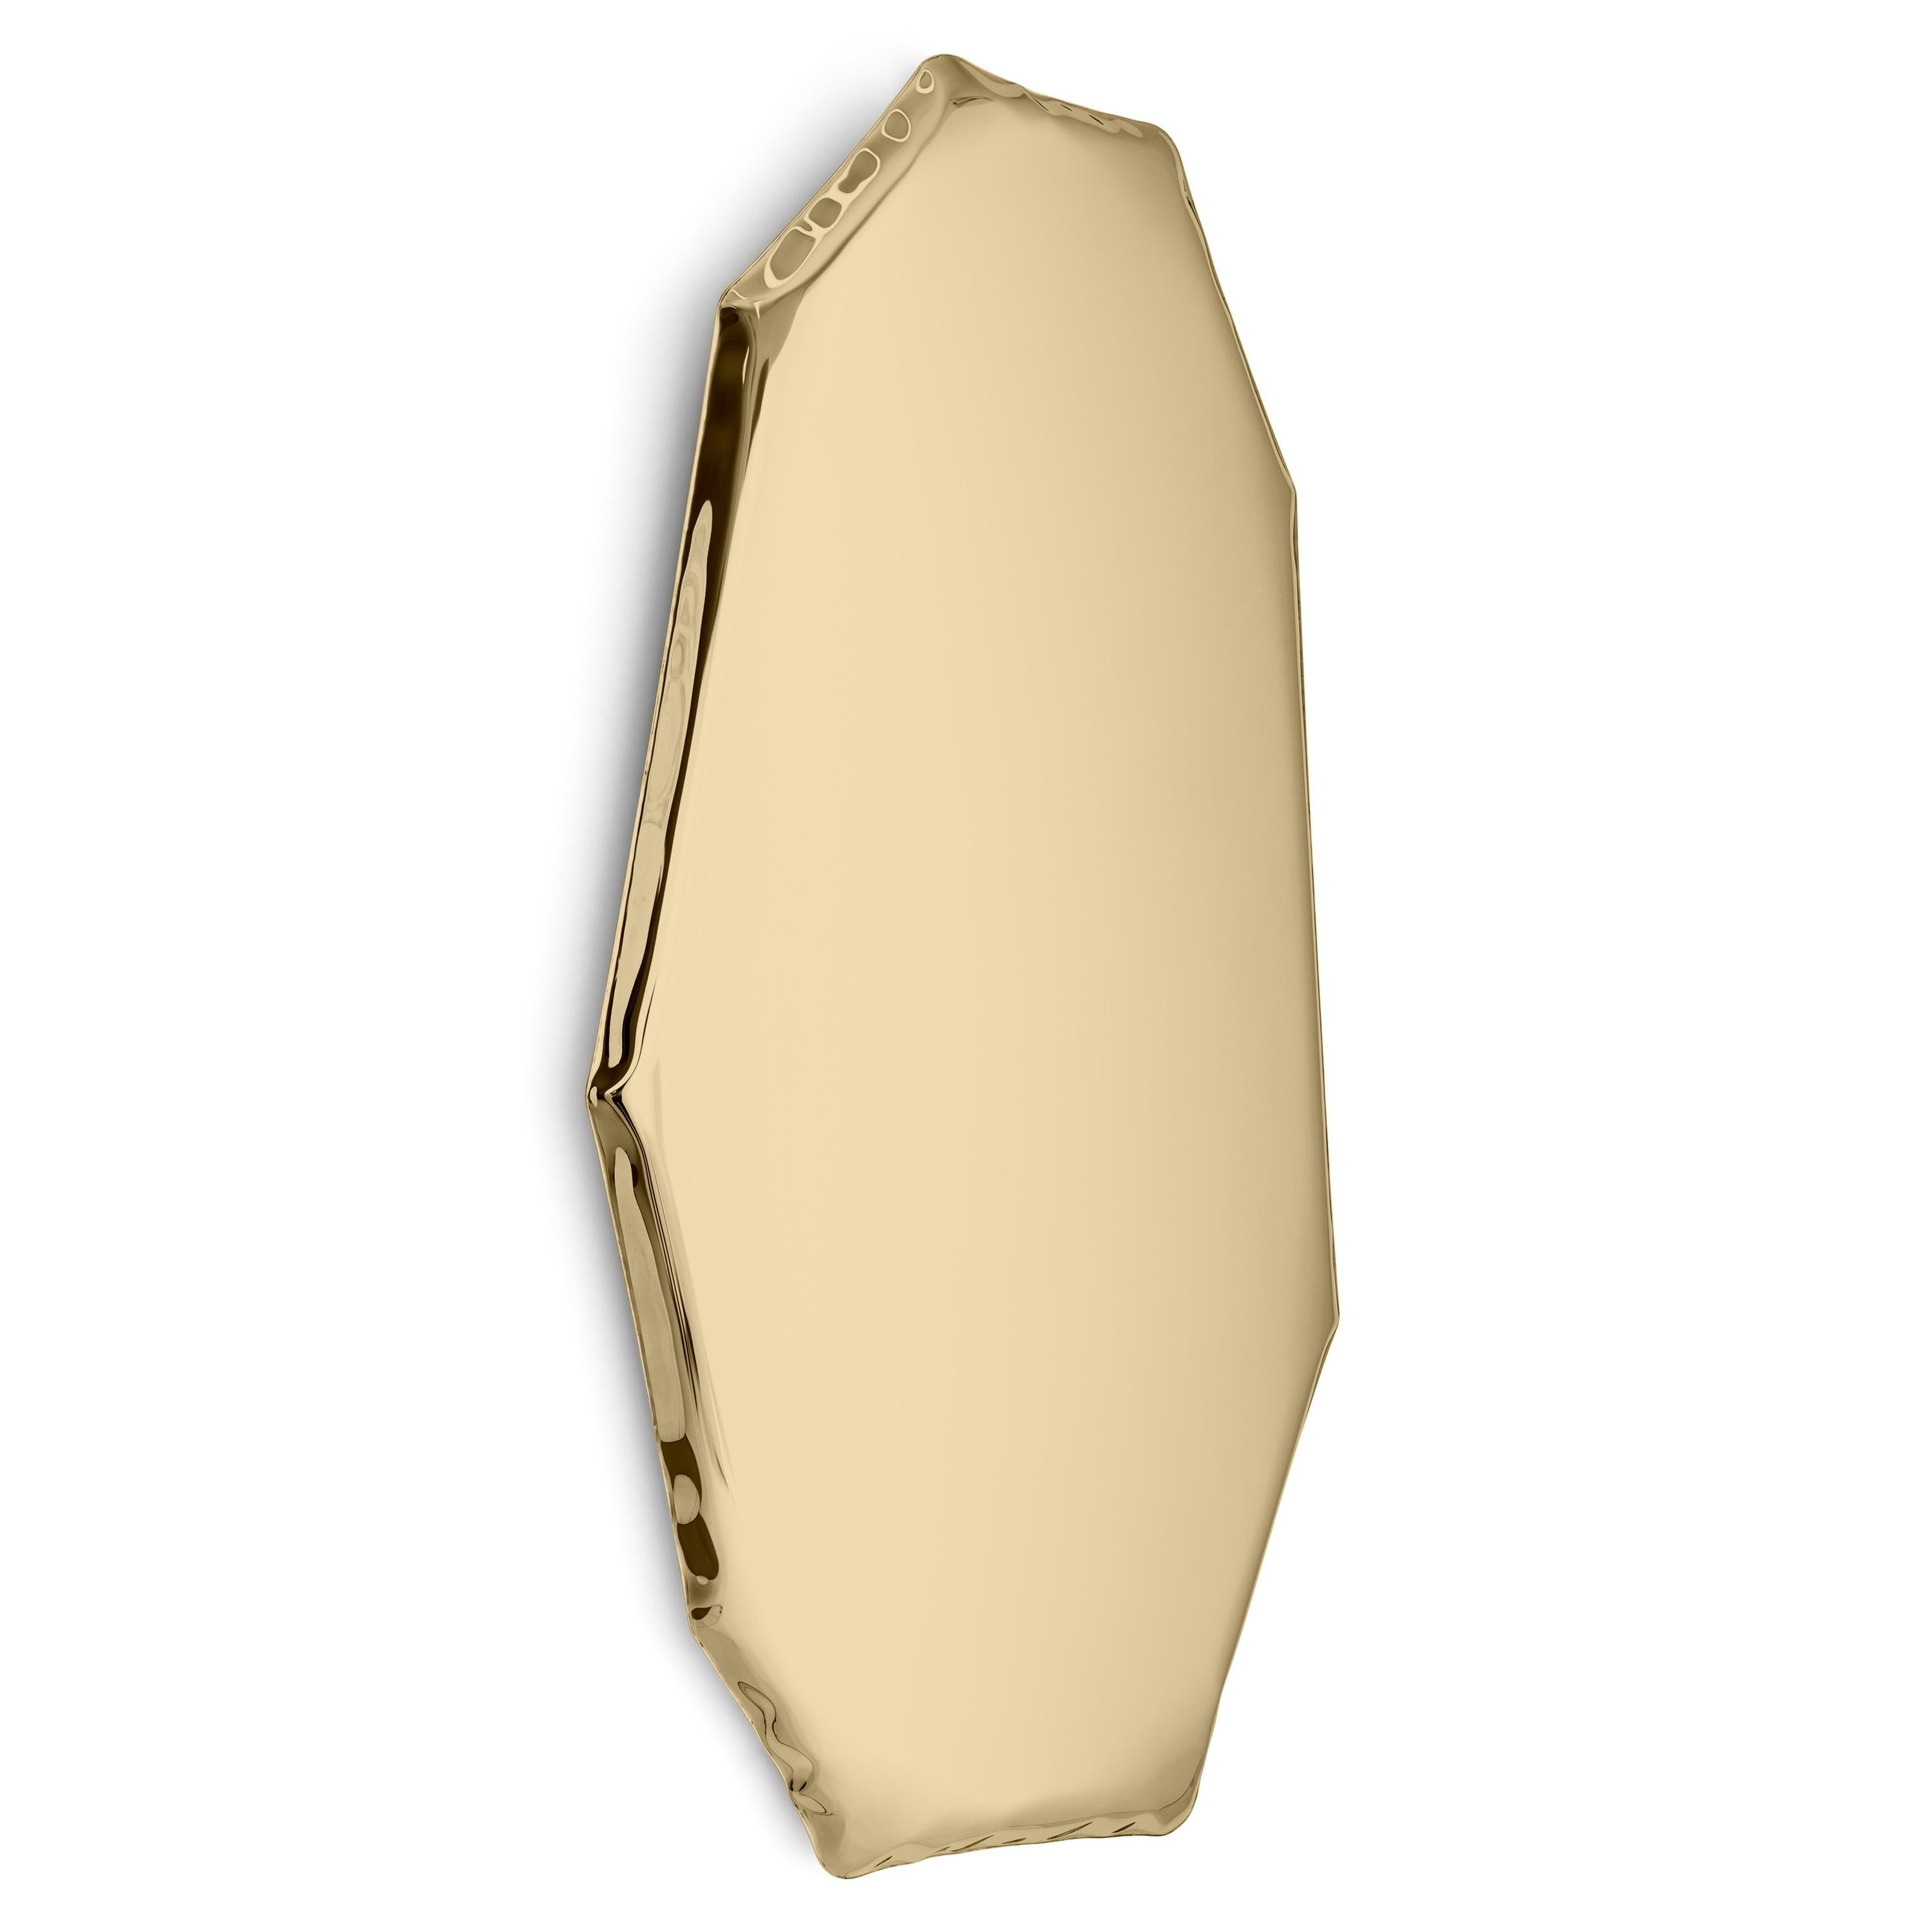 Polished Contemporary Mirror 'Tafla C3', AURUM Collection, Rose Gold, by Zieta For Sale